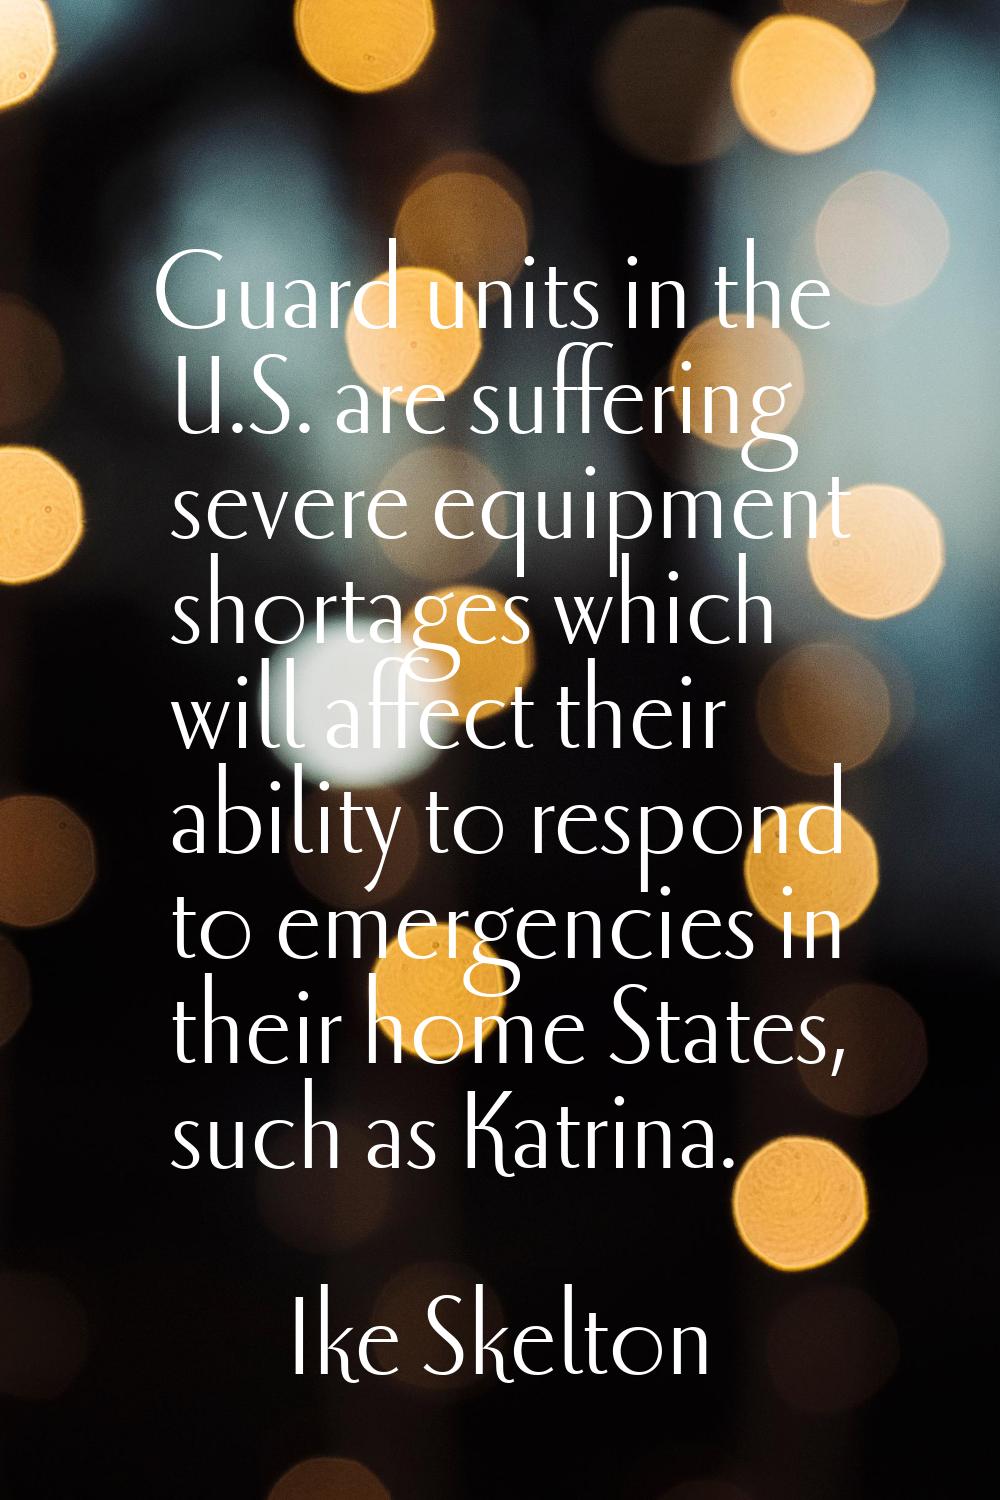 Guard units in the U.S. are suffering severe equipment shortages which will affect their ability to